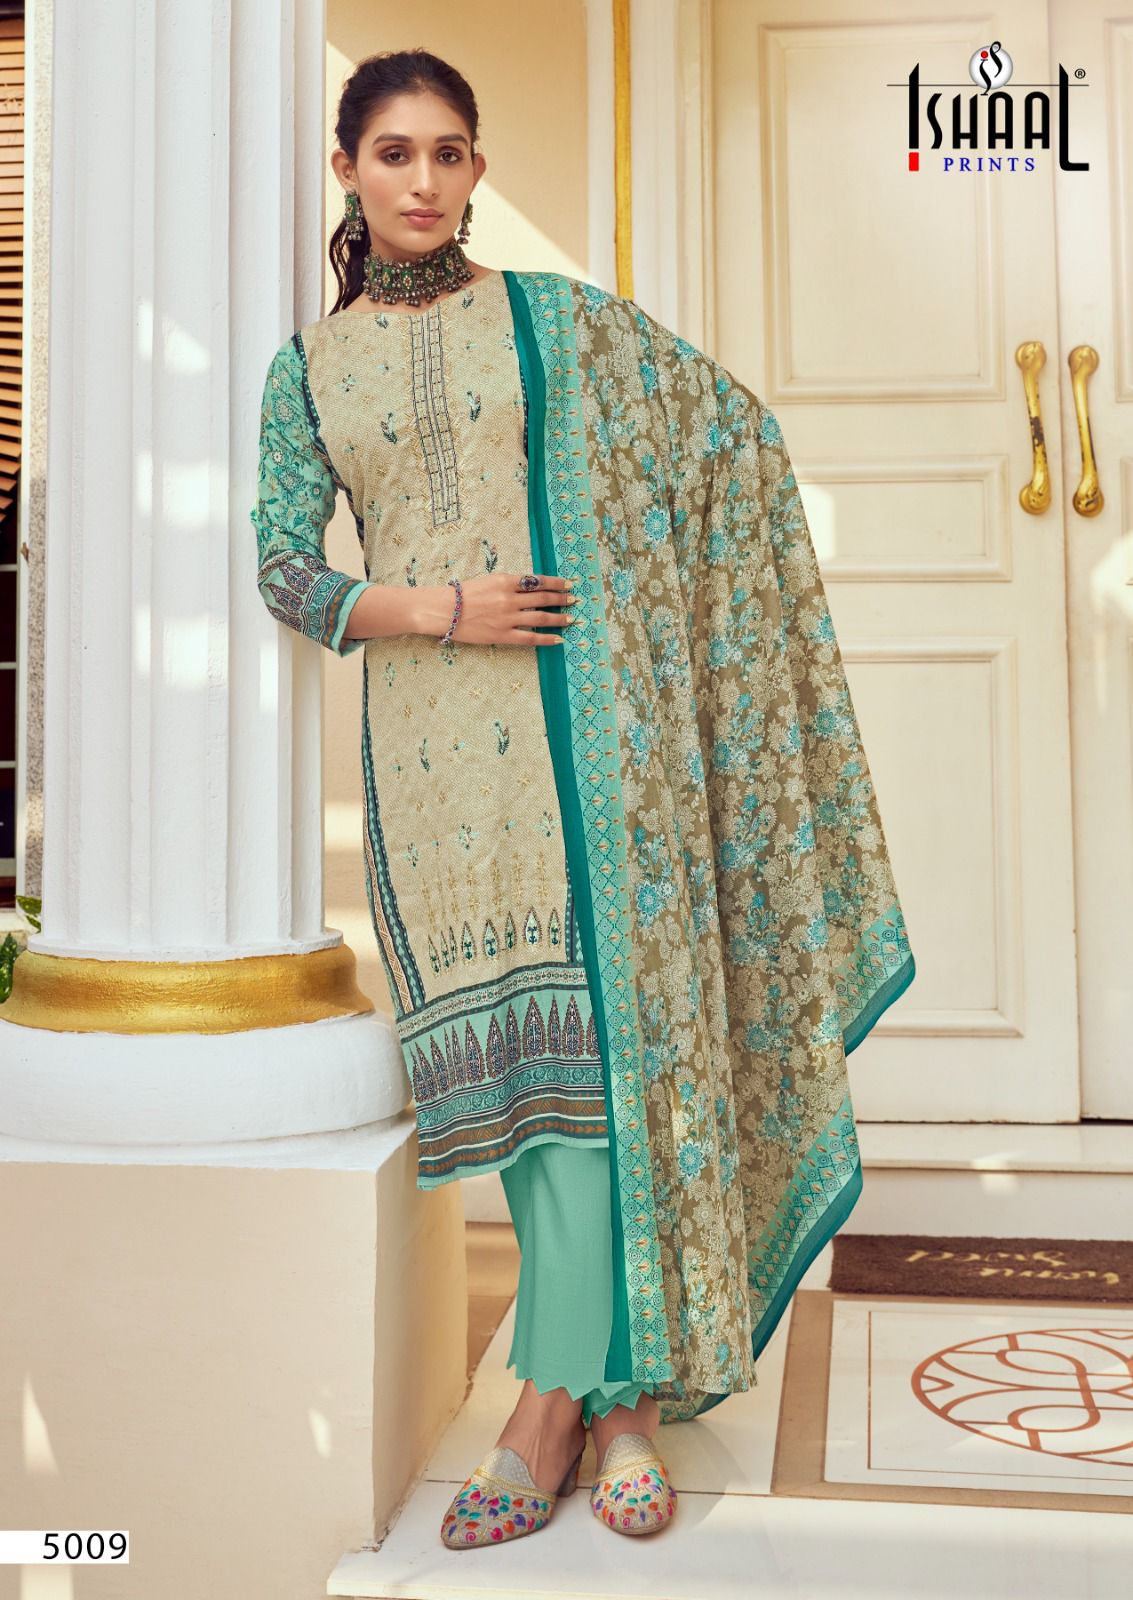 Ishaal Print Embroidered Vol  5 collection 2